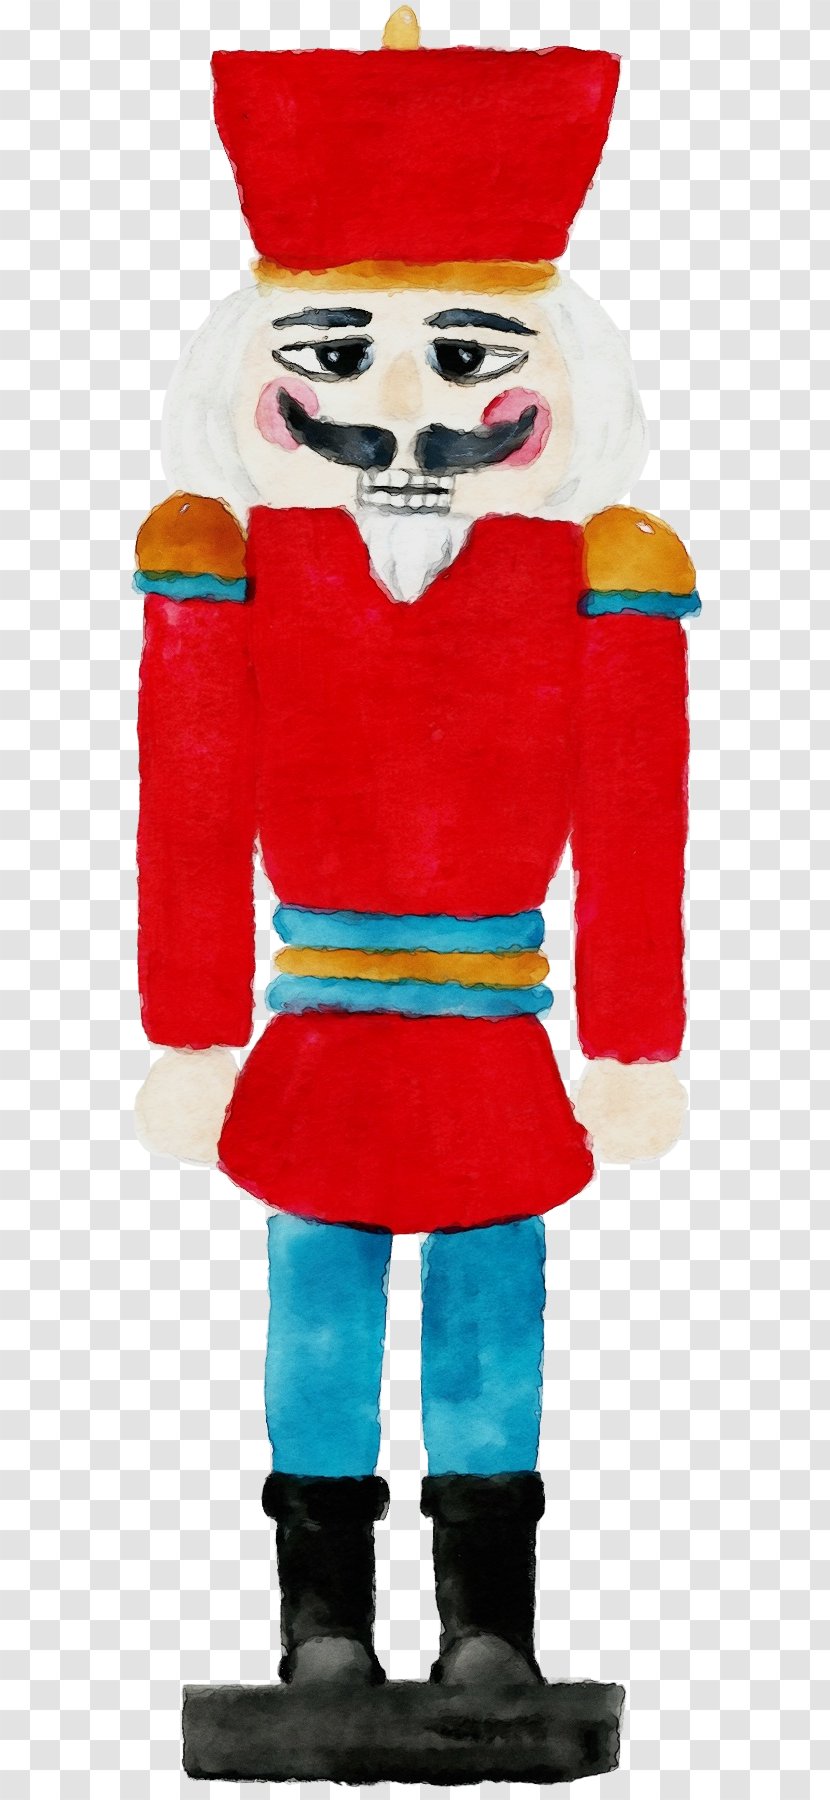 Clothing Blue Red Turquoise Toy - Wet Ink - Electric Textile Transparent PNG